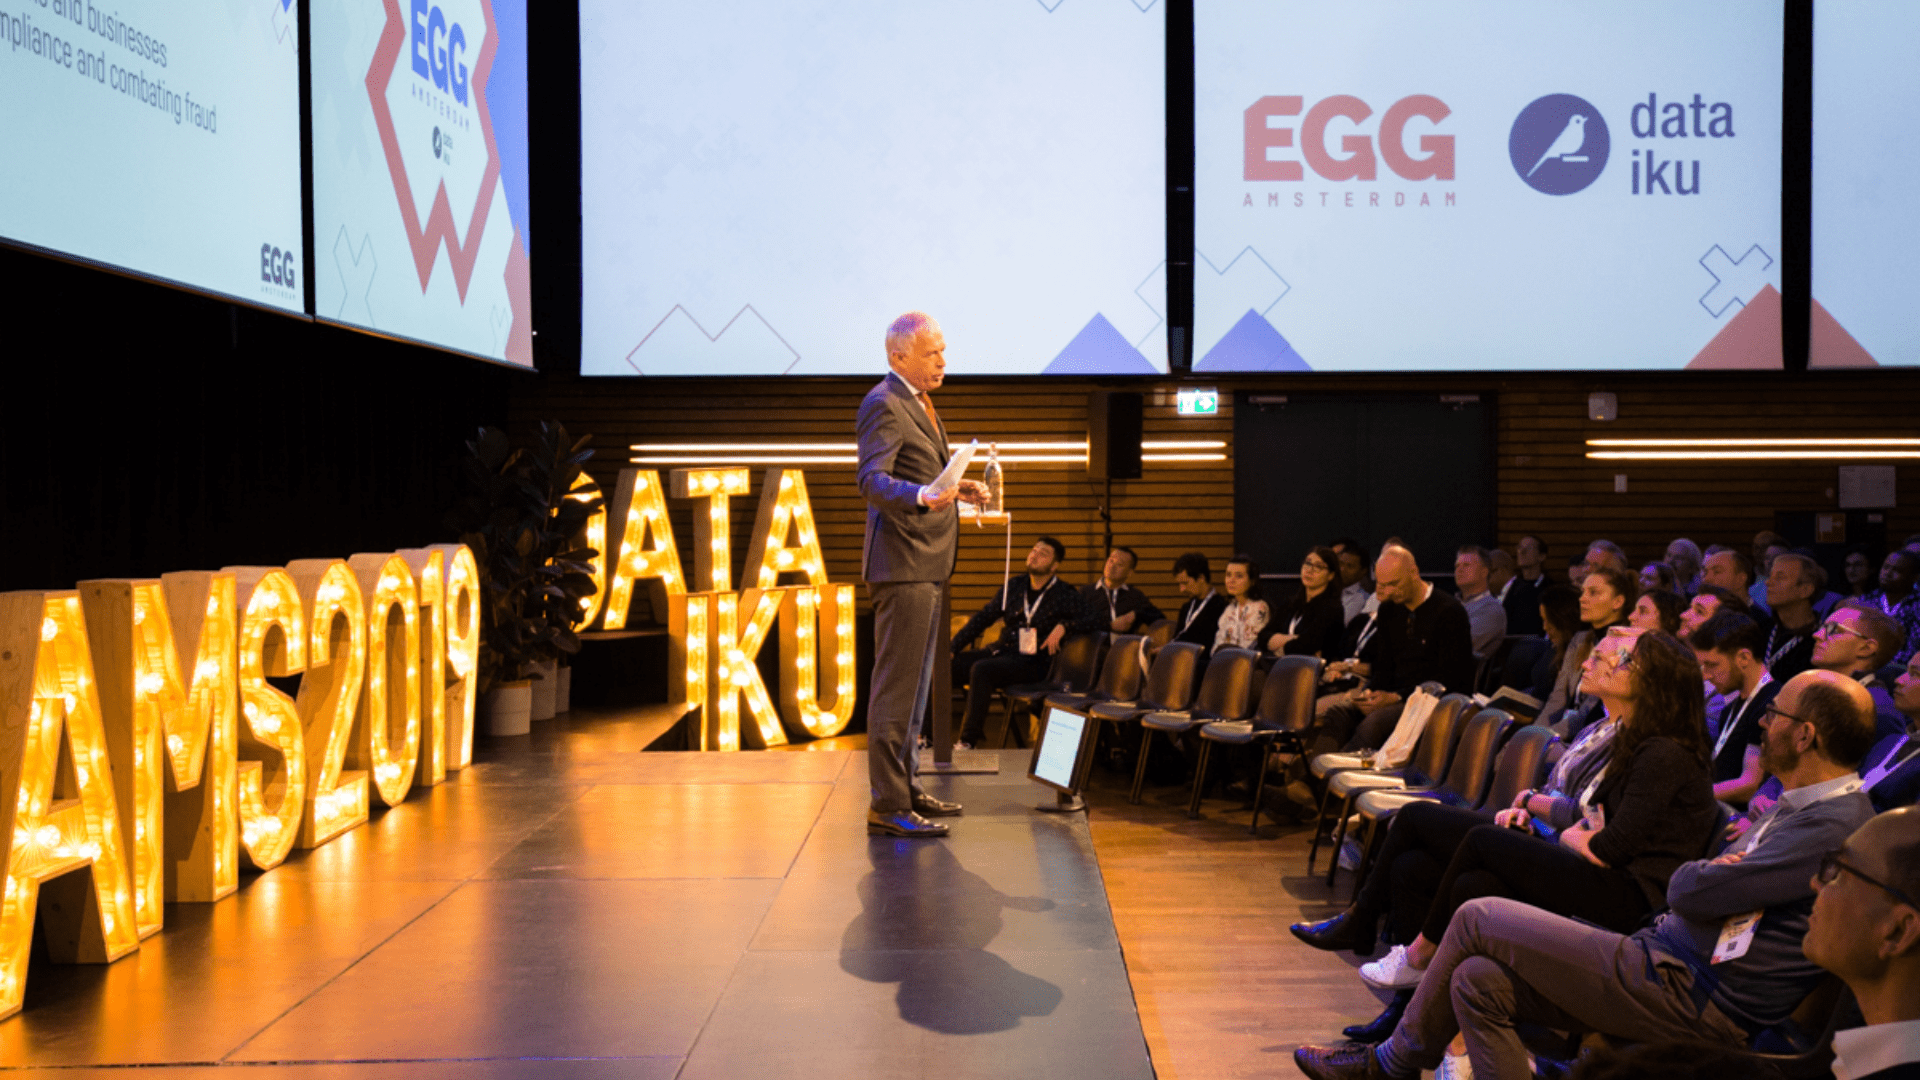 egg on air thumbnail How to improve and innovate Tax Collection by Municipalities EGG AMS 2019